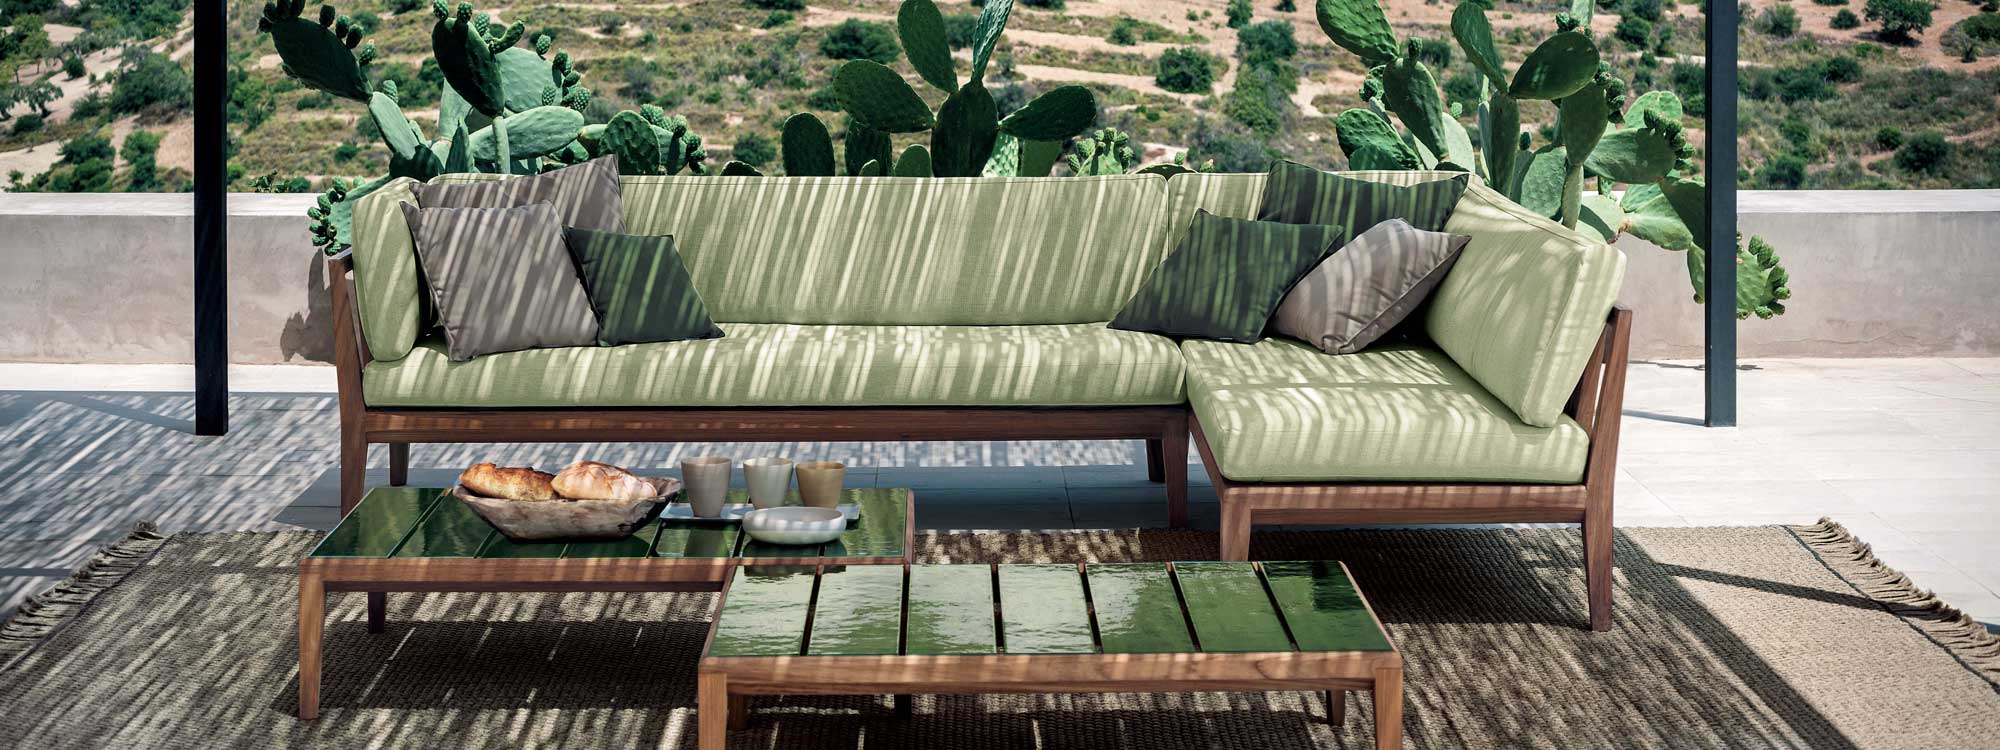 Teka outdoor corner sofa and Teka low table beneather pergola with cacti in background